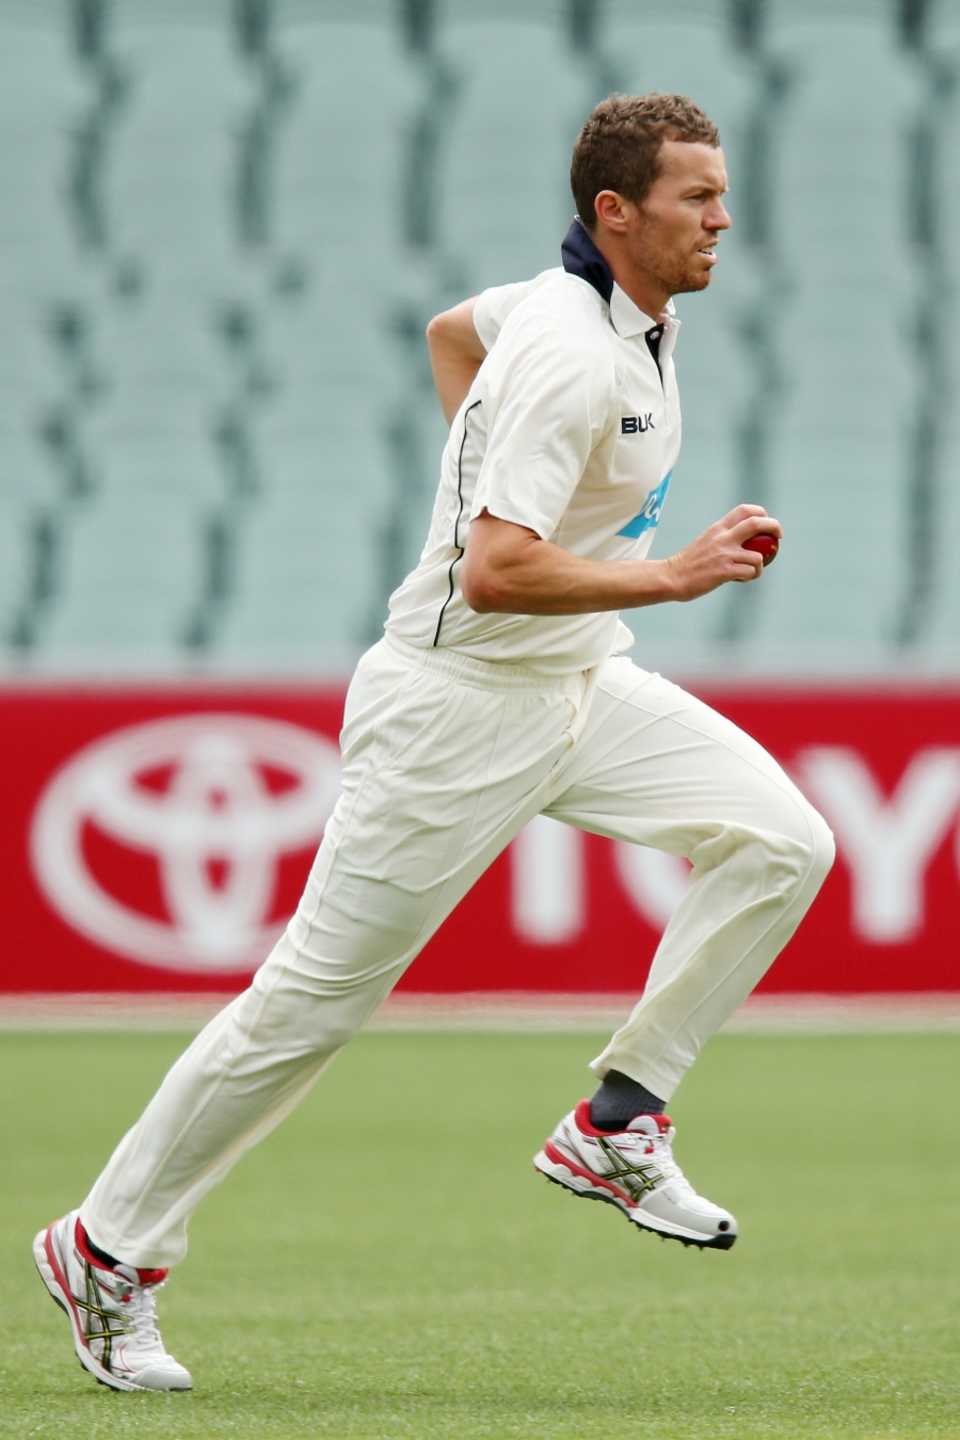 Peter Siddle runs in to bowl